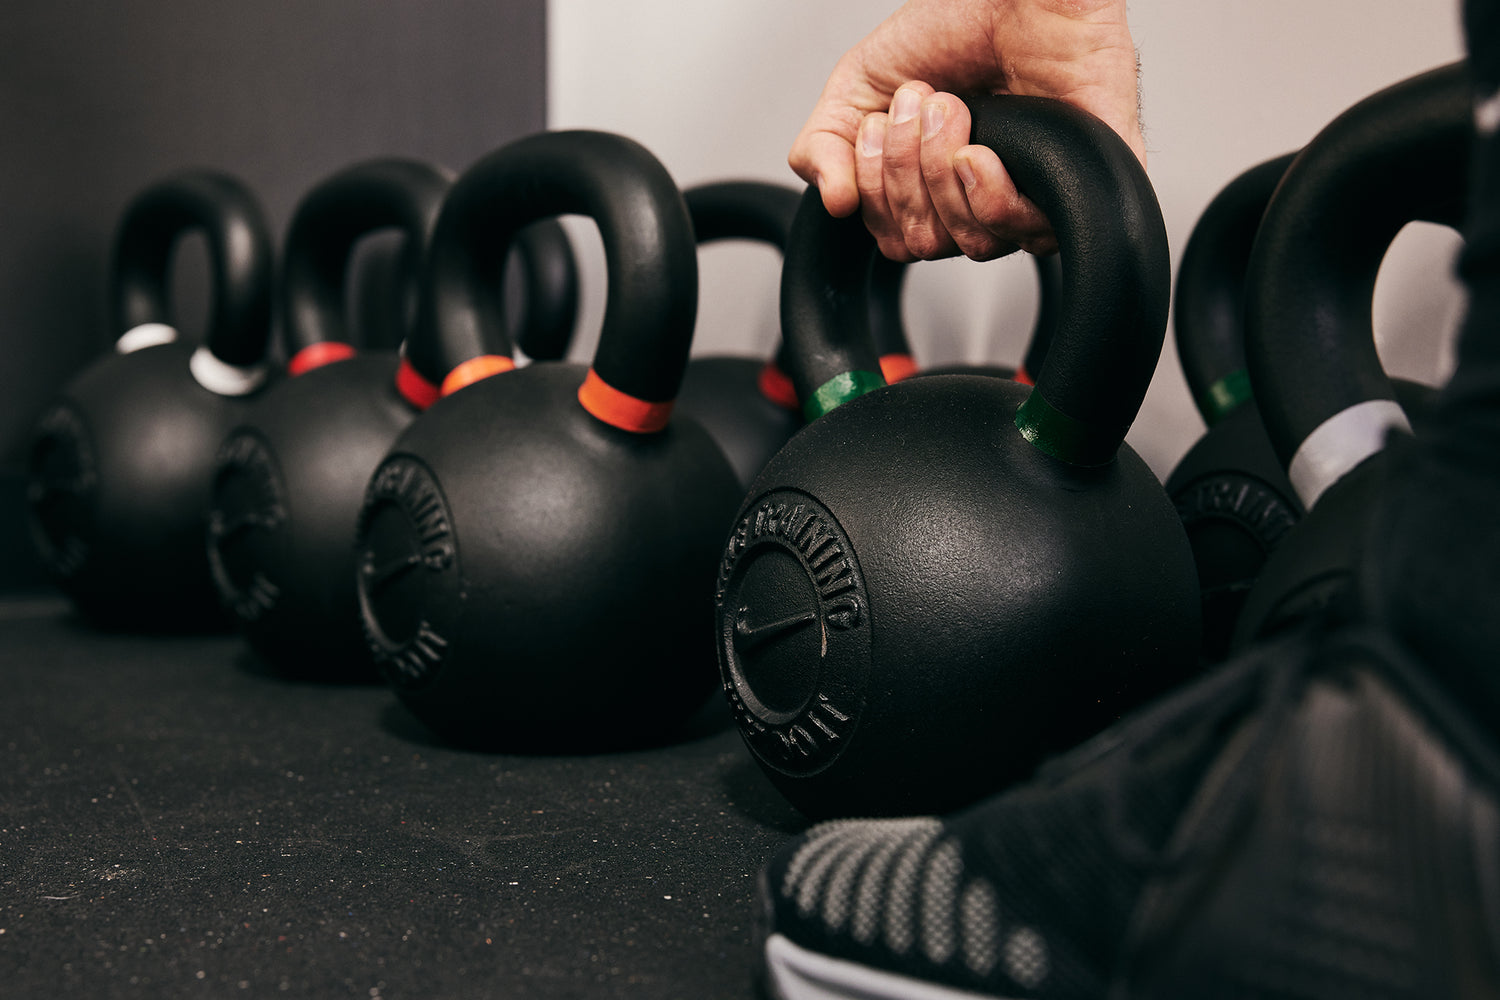 A variety of the Nike Kettlebell sitting on the gym floor